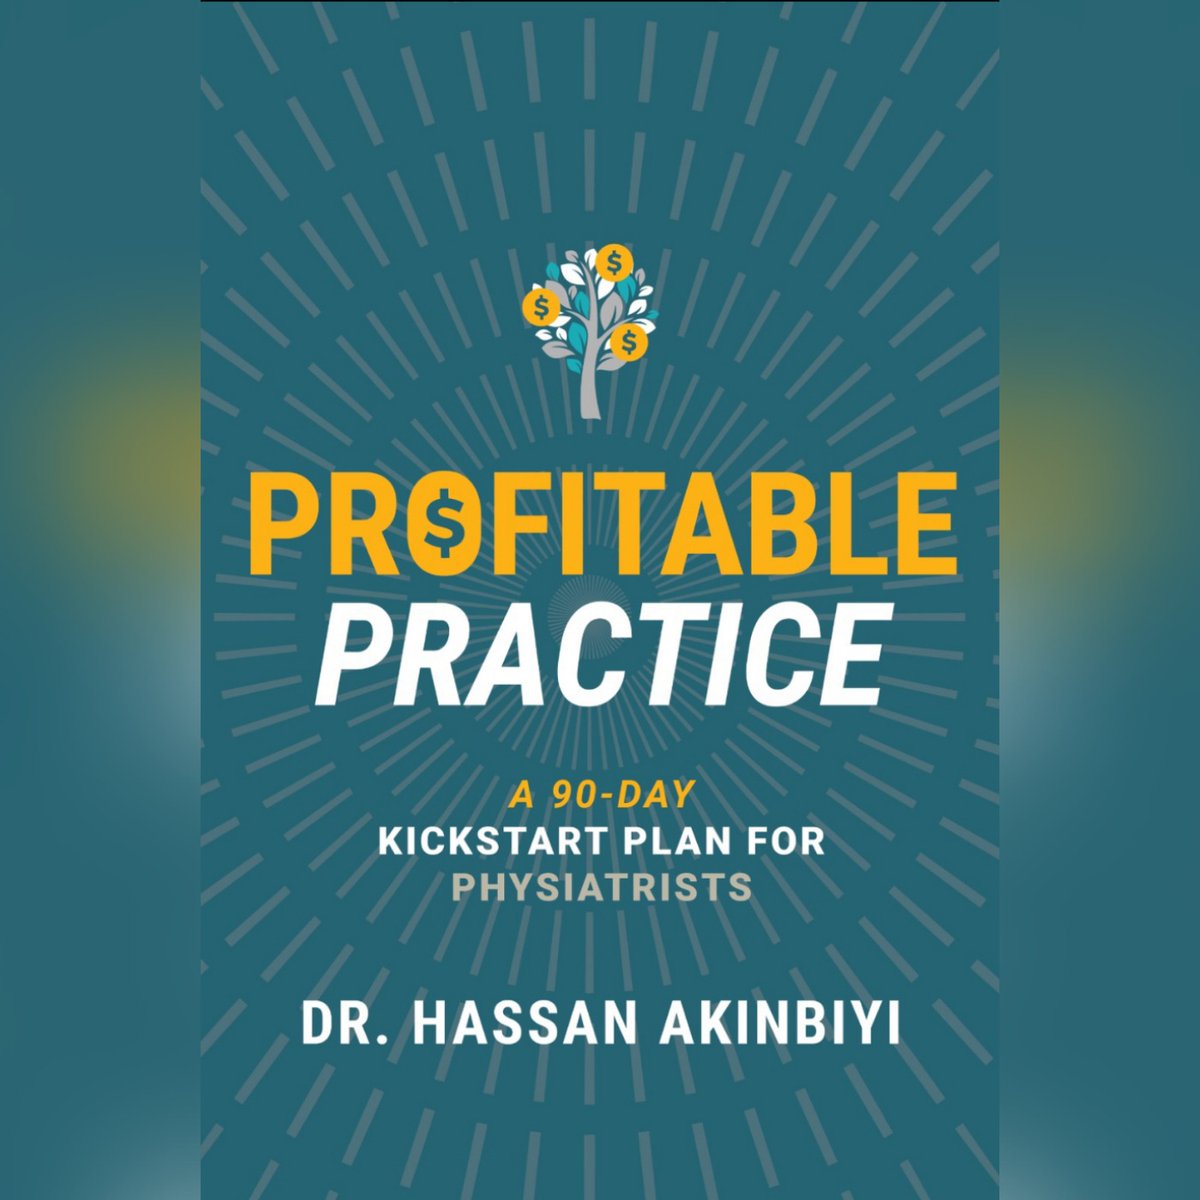 Use the tips and insights in Profitable Practice to build your own profitable independent practice.

Order yours: profitablepracticeplan.com/?utm_source=tw…

#physiatry #physiatrist #physicalmedicine #AAPMR #PMR #rehabilitation #AAPMR23 #postacute @AAPMR #MedicalMoguls @DrDraiOBGYN @MedicalMoguls